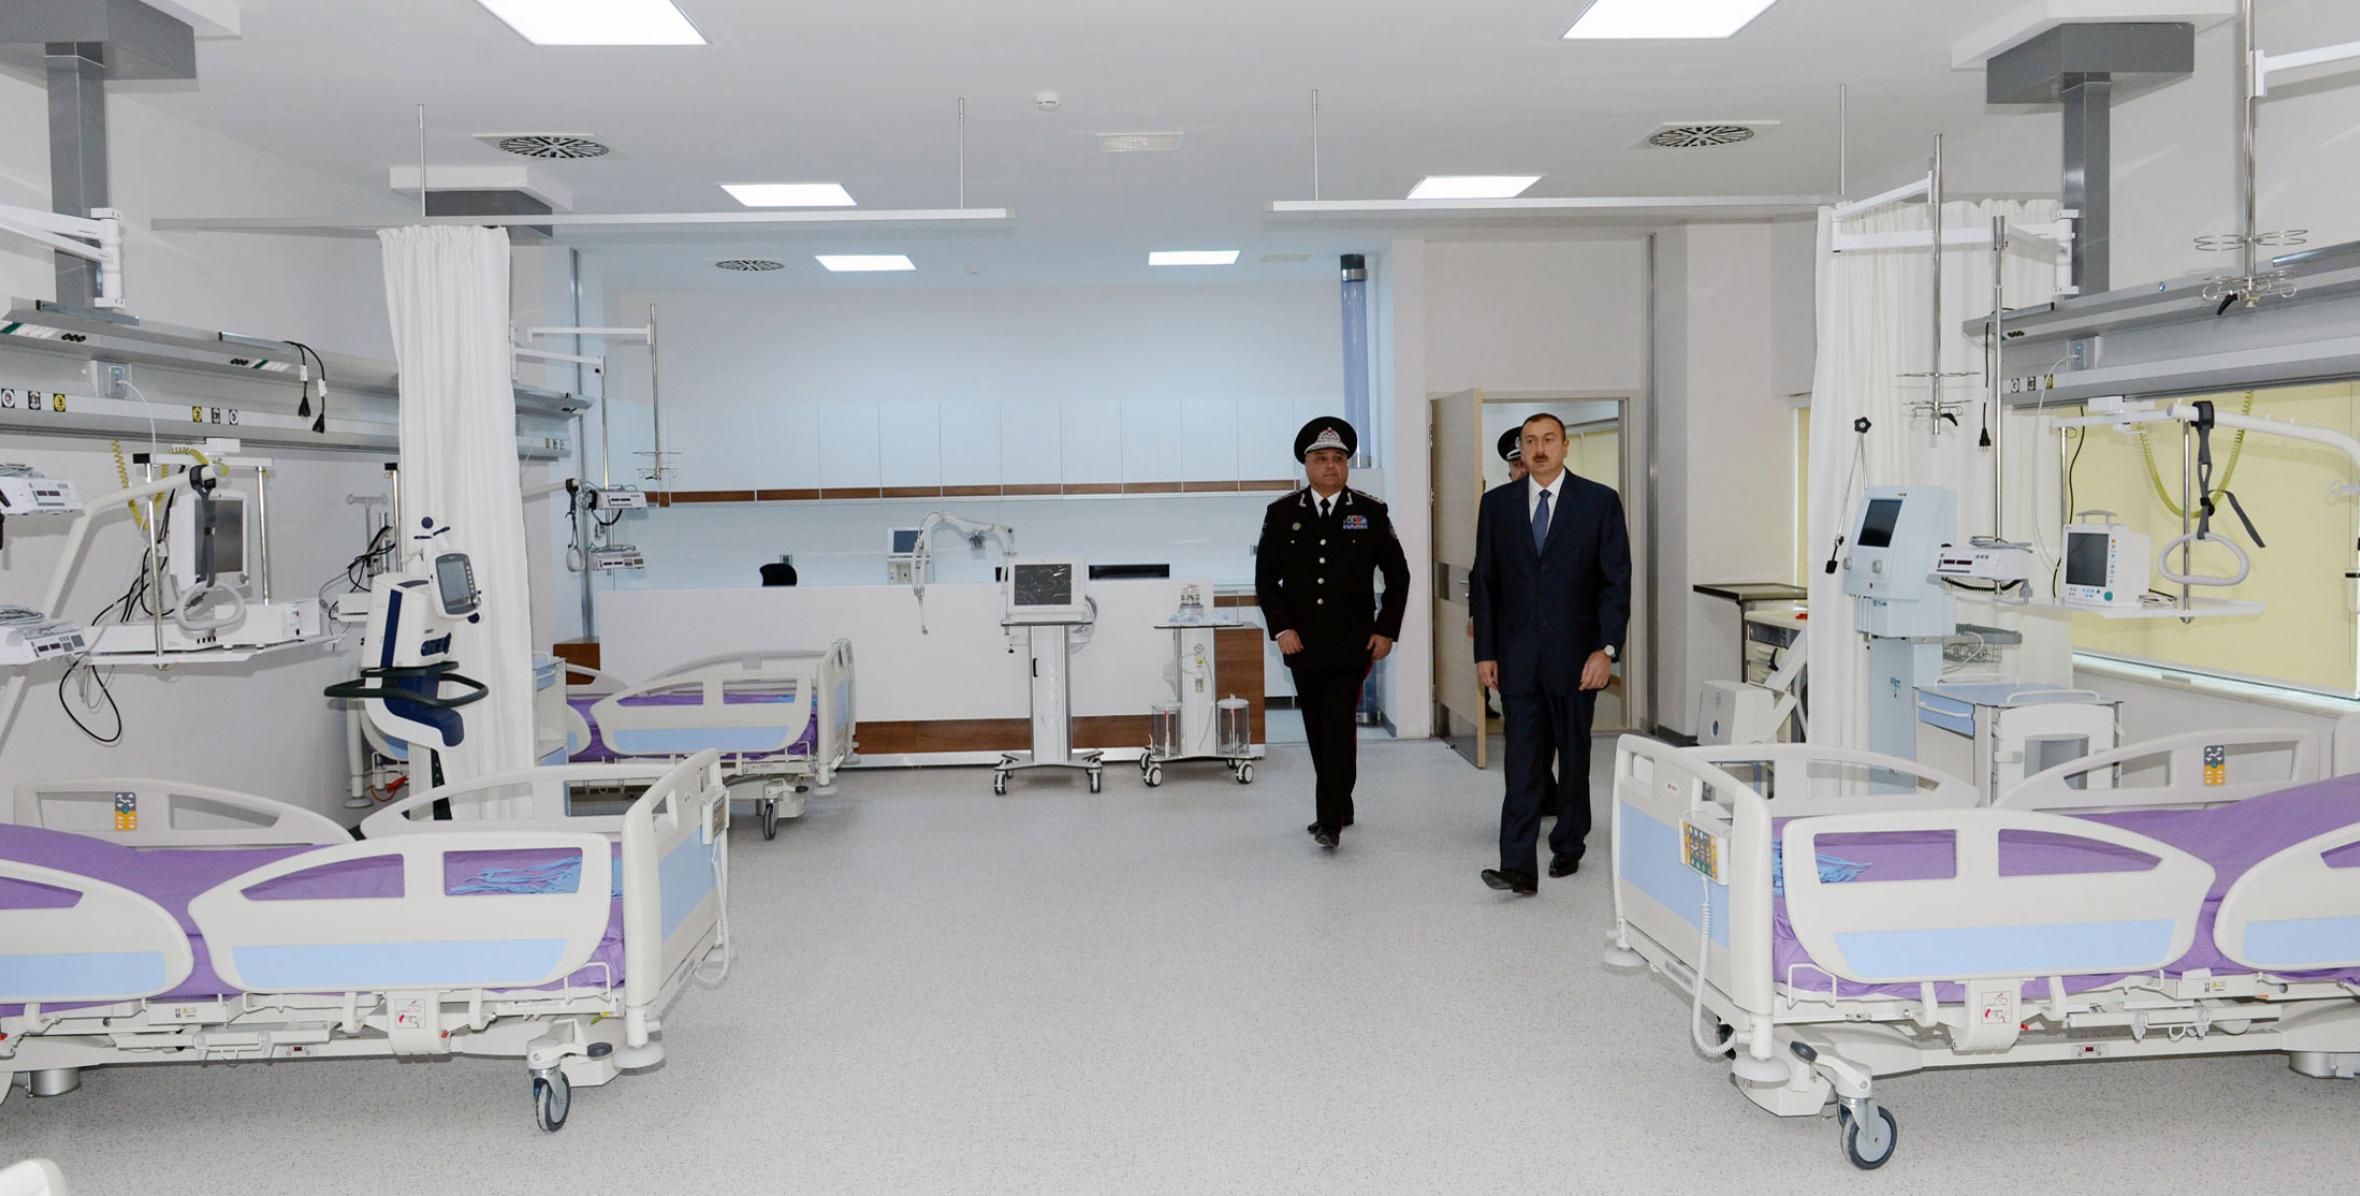 Ilham Aliyev attended the opening of a military hospital of the Ministry of National Security